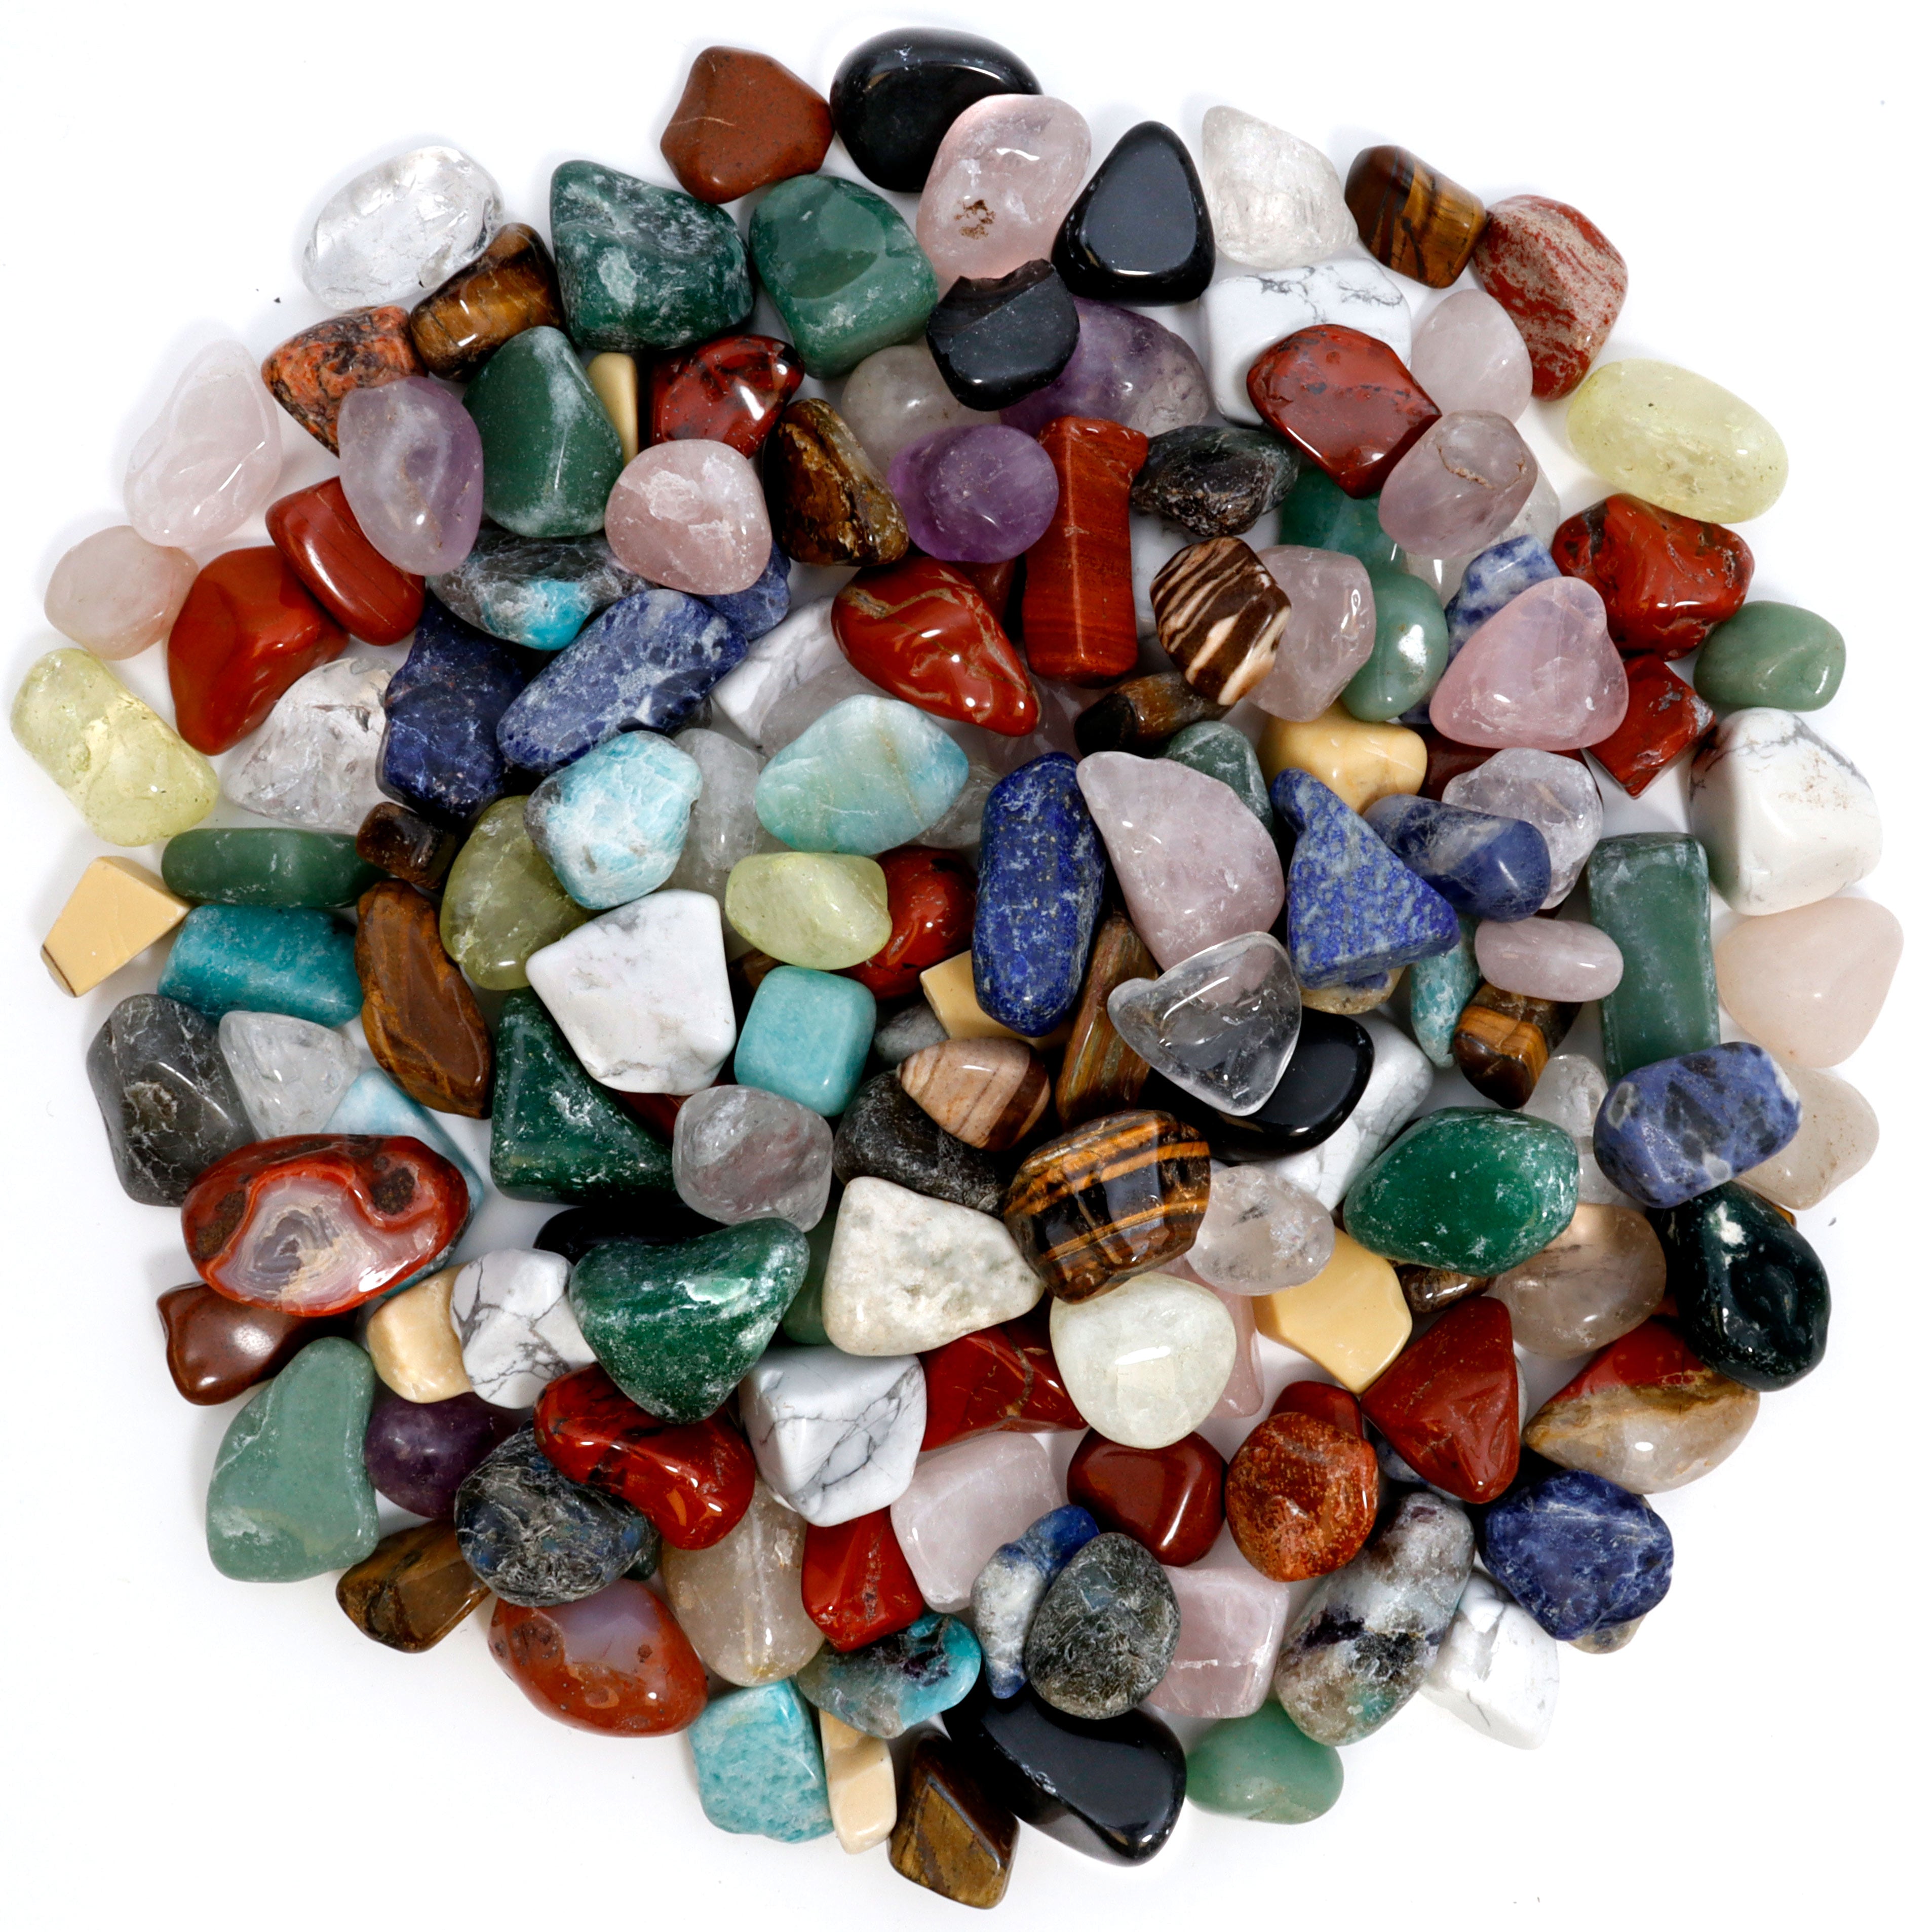 2 Pounds Tumbled Polished Natural Gem Stones + Educational Color ID Sheet & 24 Page Rock & Mineral Book. Average Stone Size inch. Choose 1, 2, 5, 11